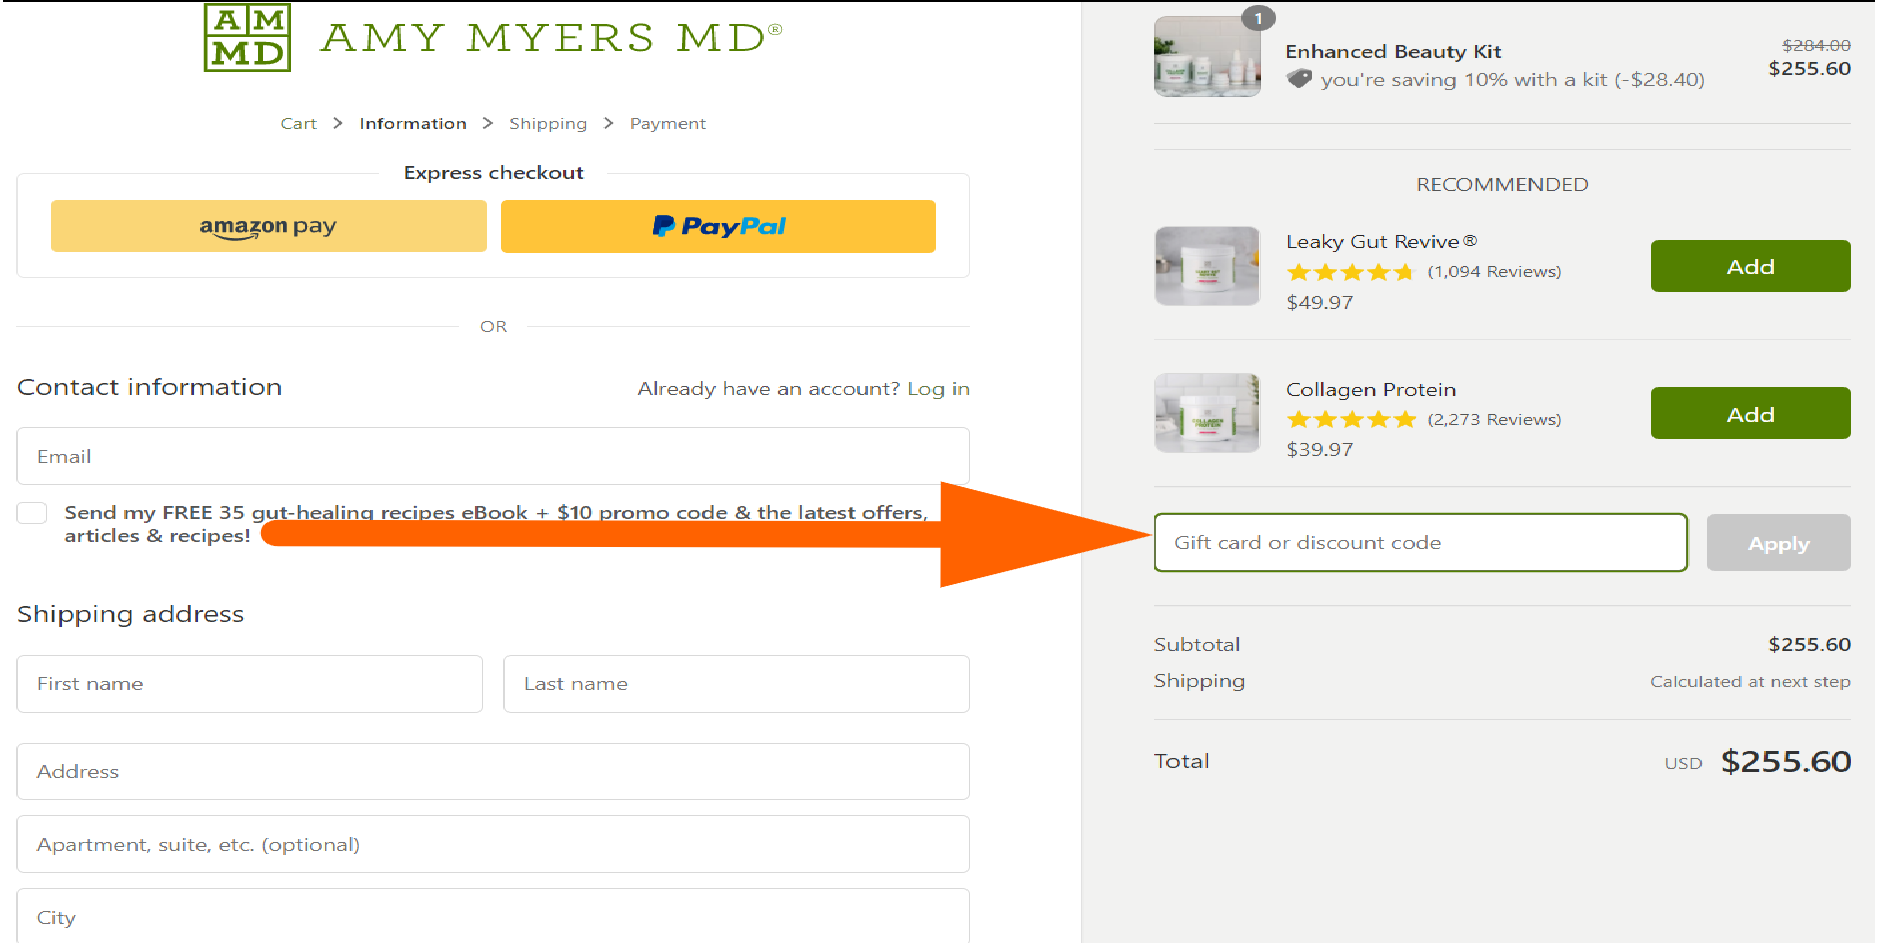 amy myers md coupon code